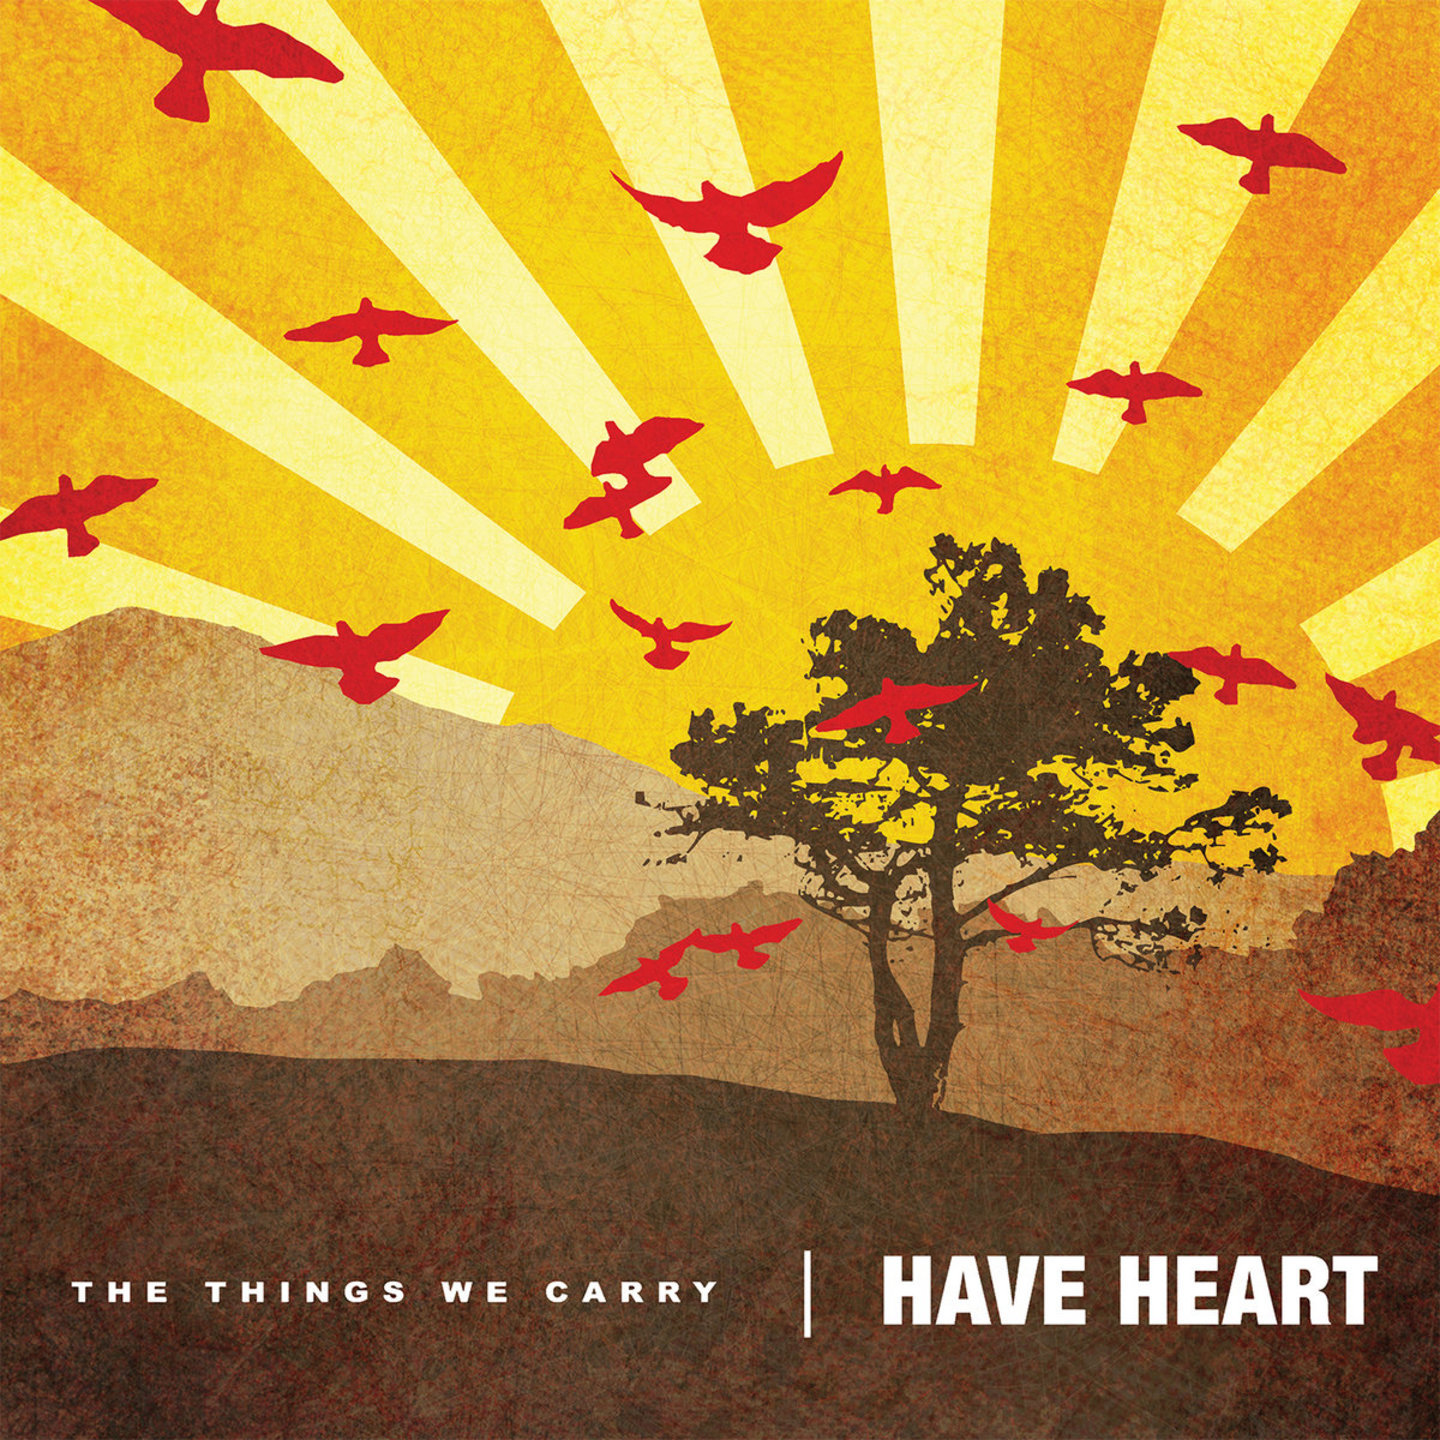 HAVE HEART - The Things We Carry LP